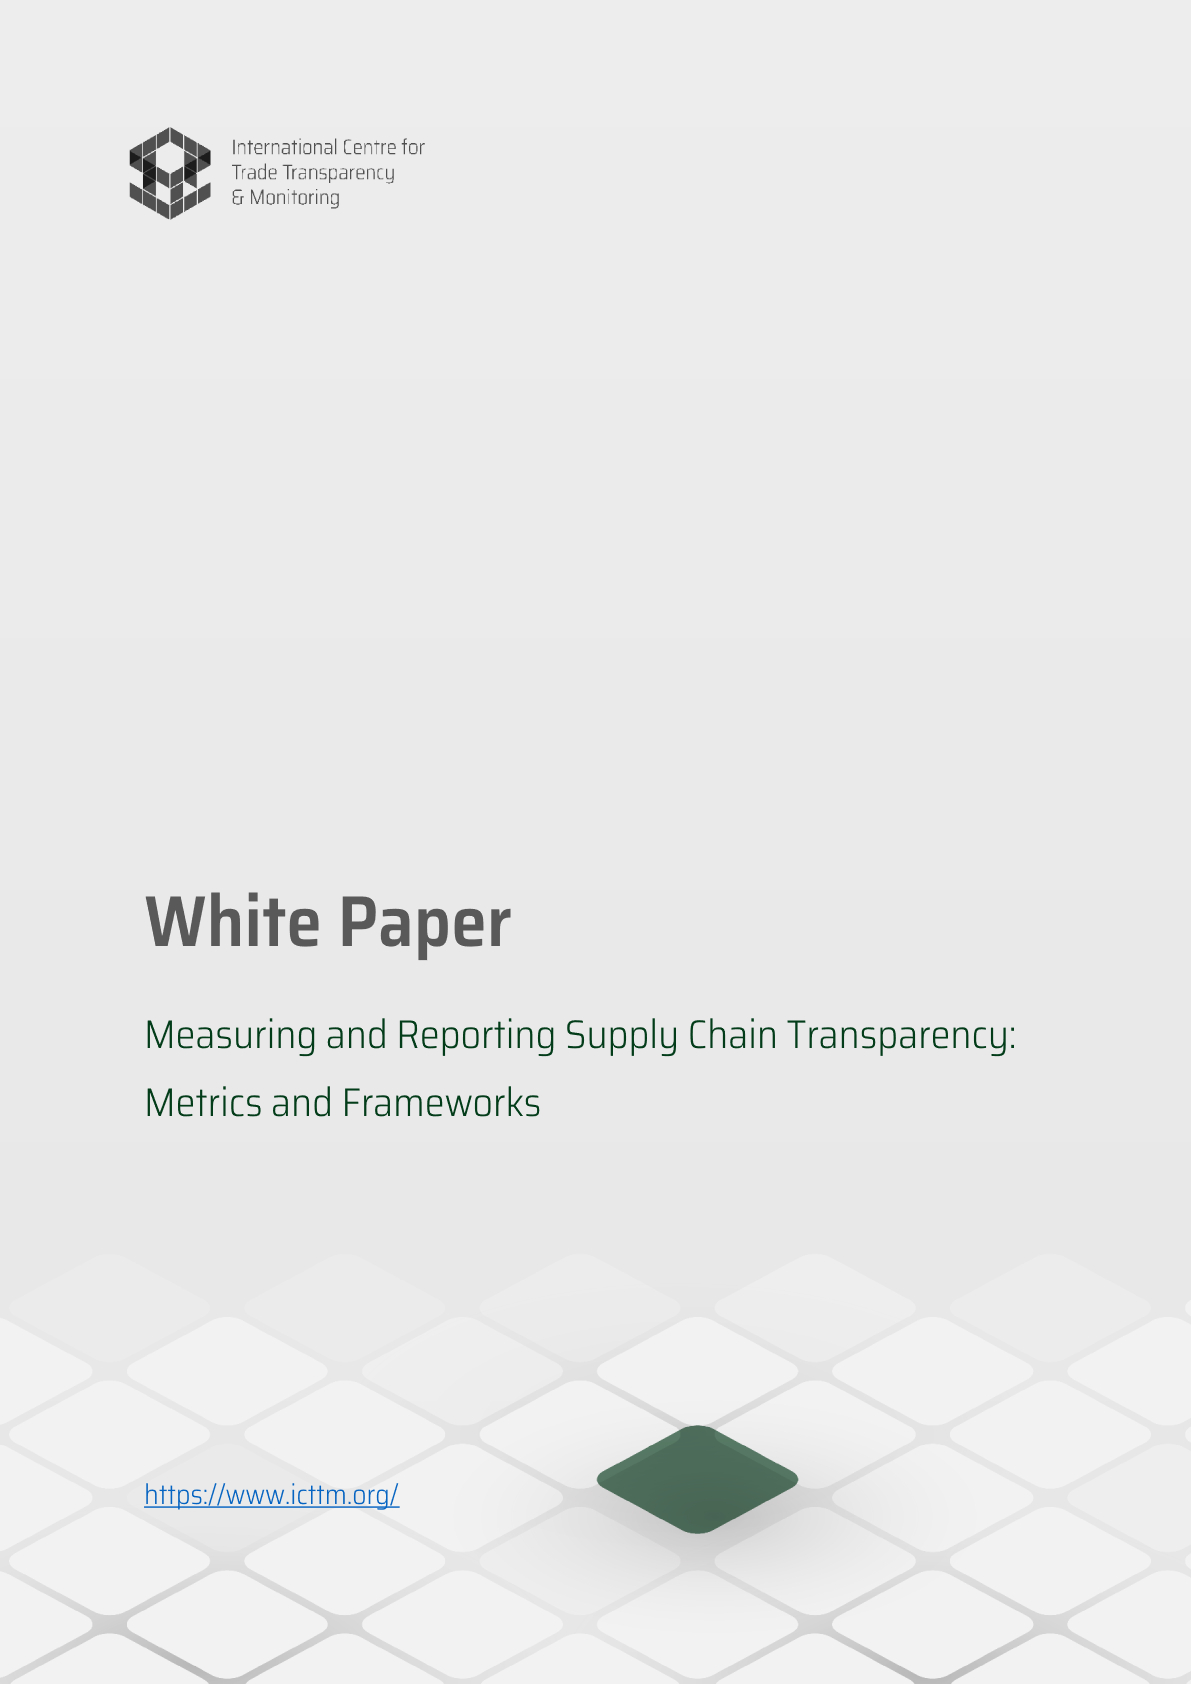 Measuring and Reporting Supply Chain Transparency - Metrics and Frameworks